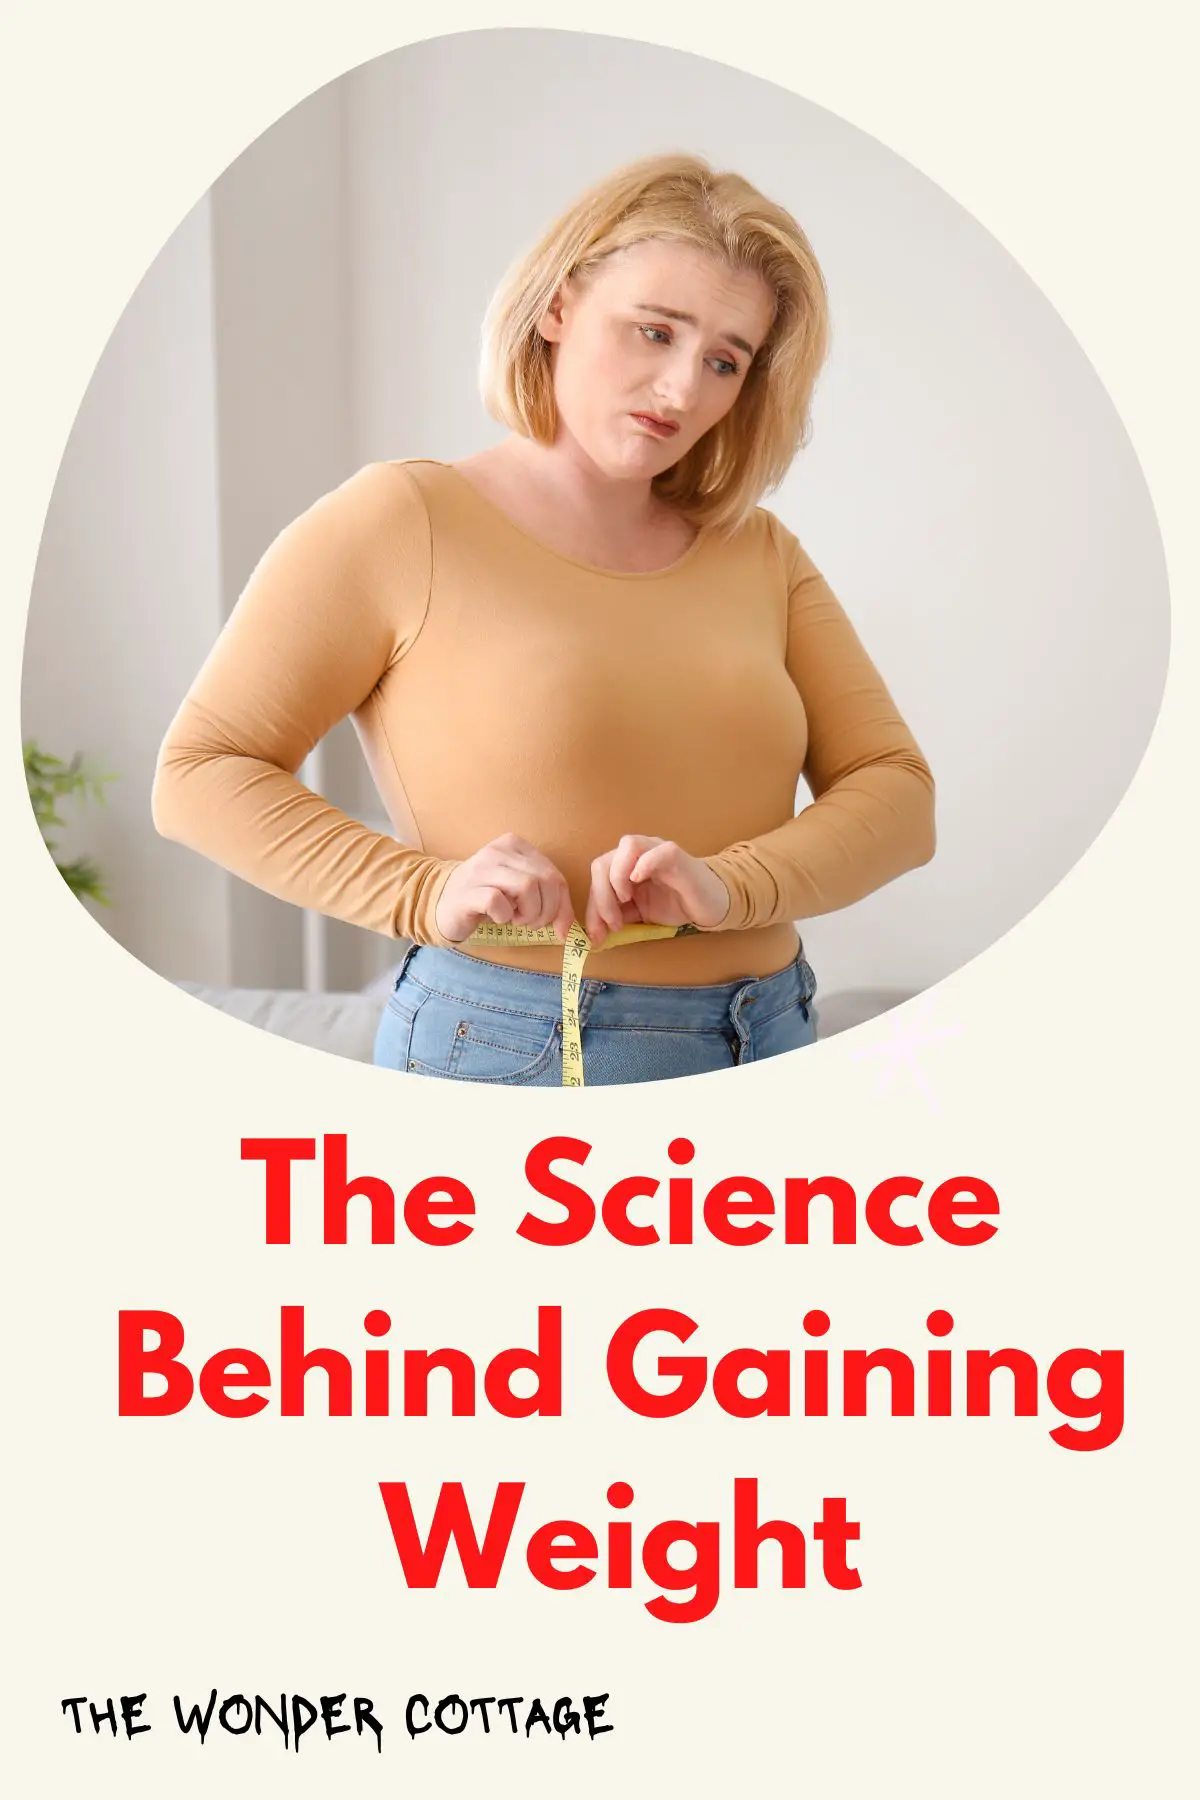 The Science Behind Gaining Weight